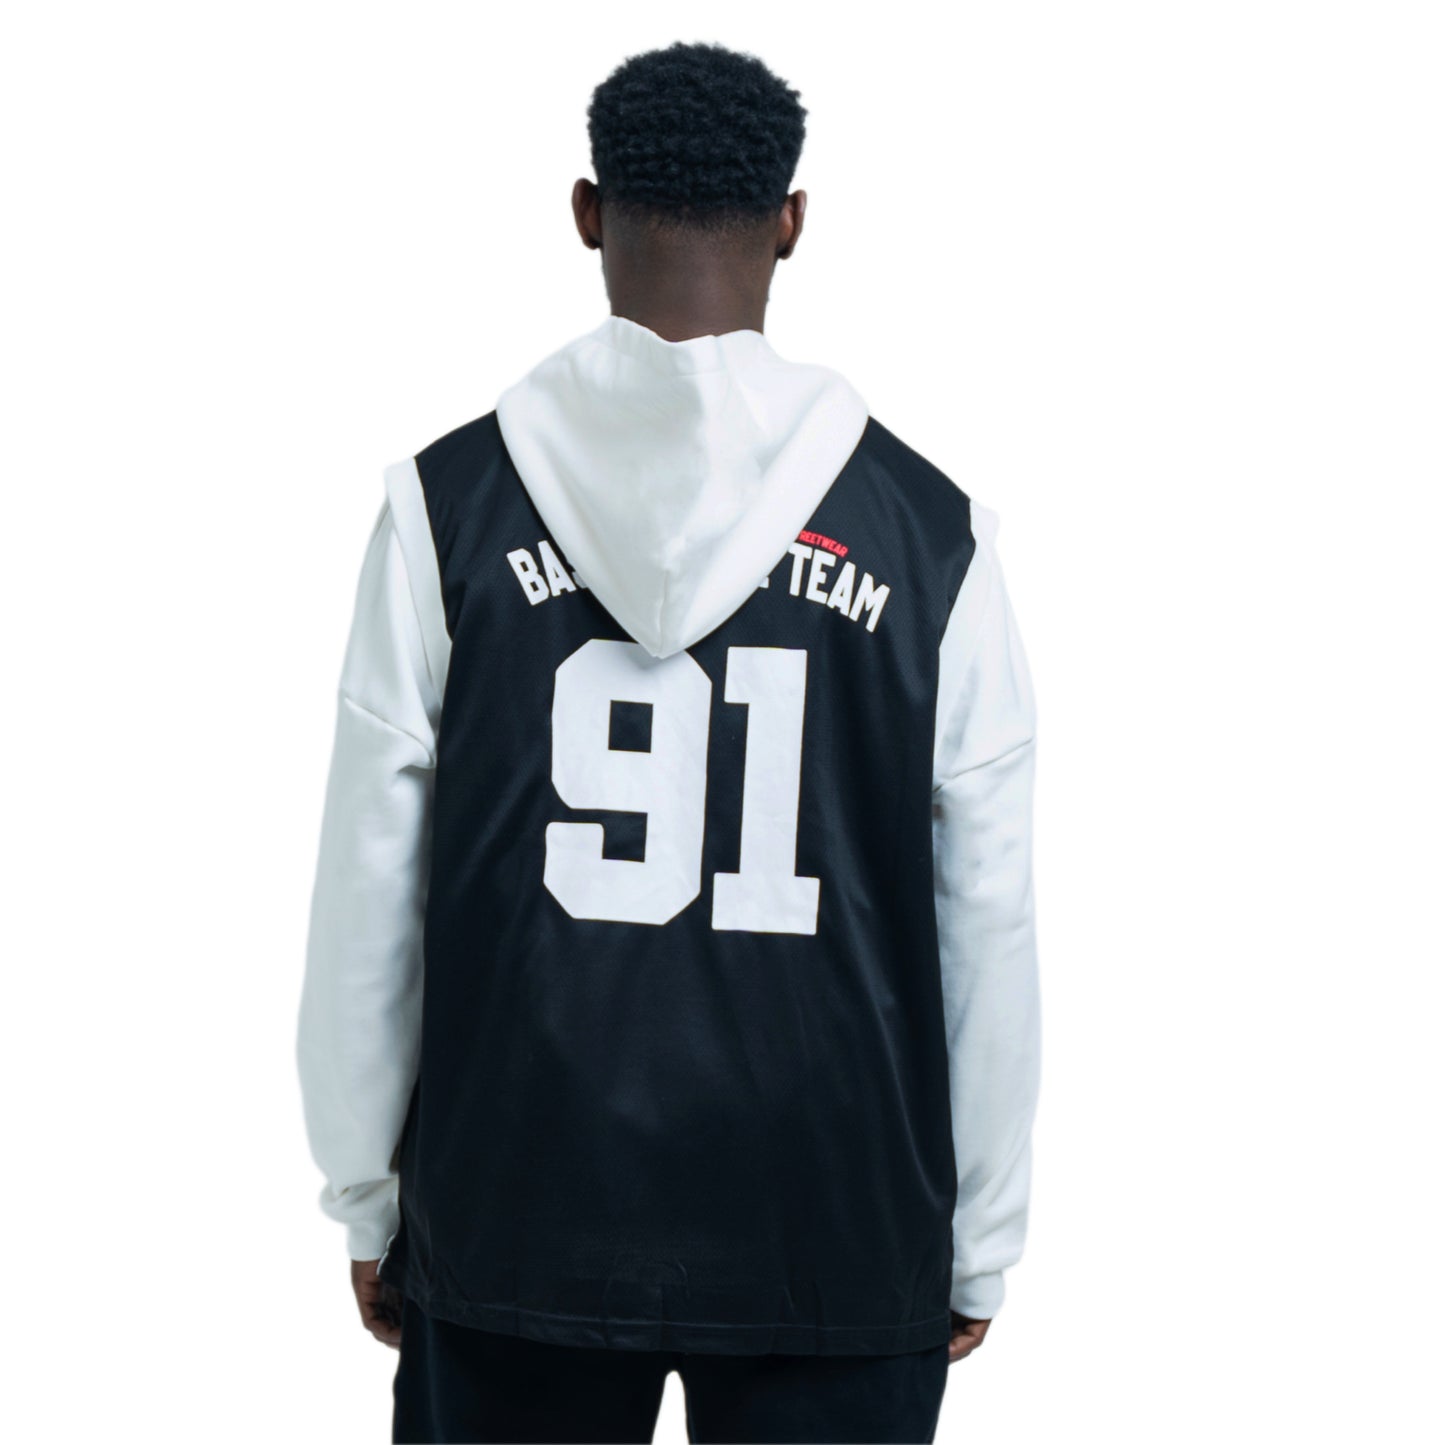 DOUBLE LAYER JERSEY - WHITE HOODIE